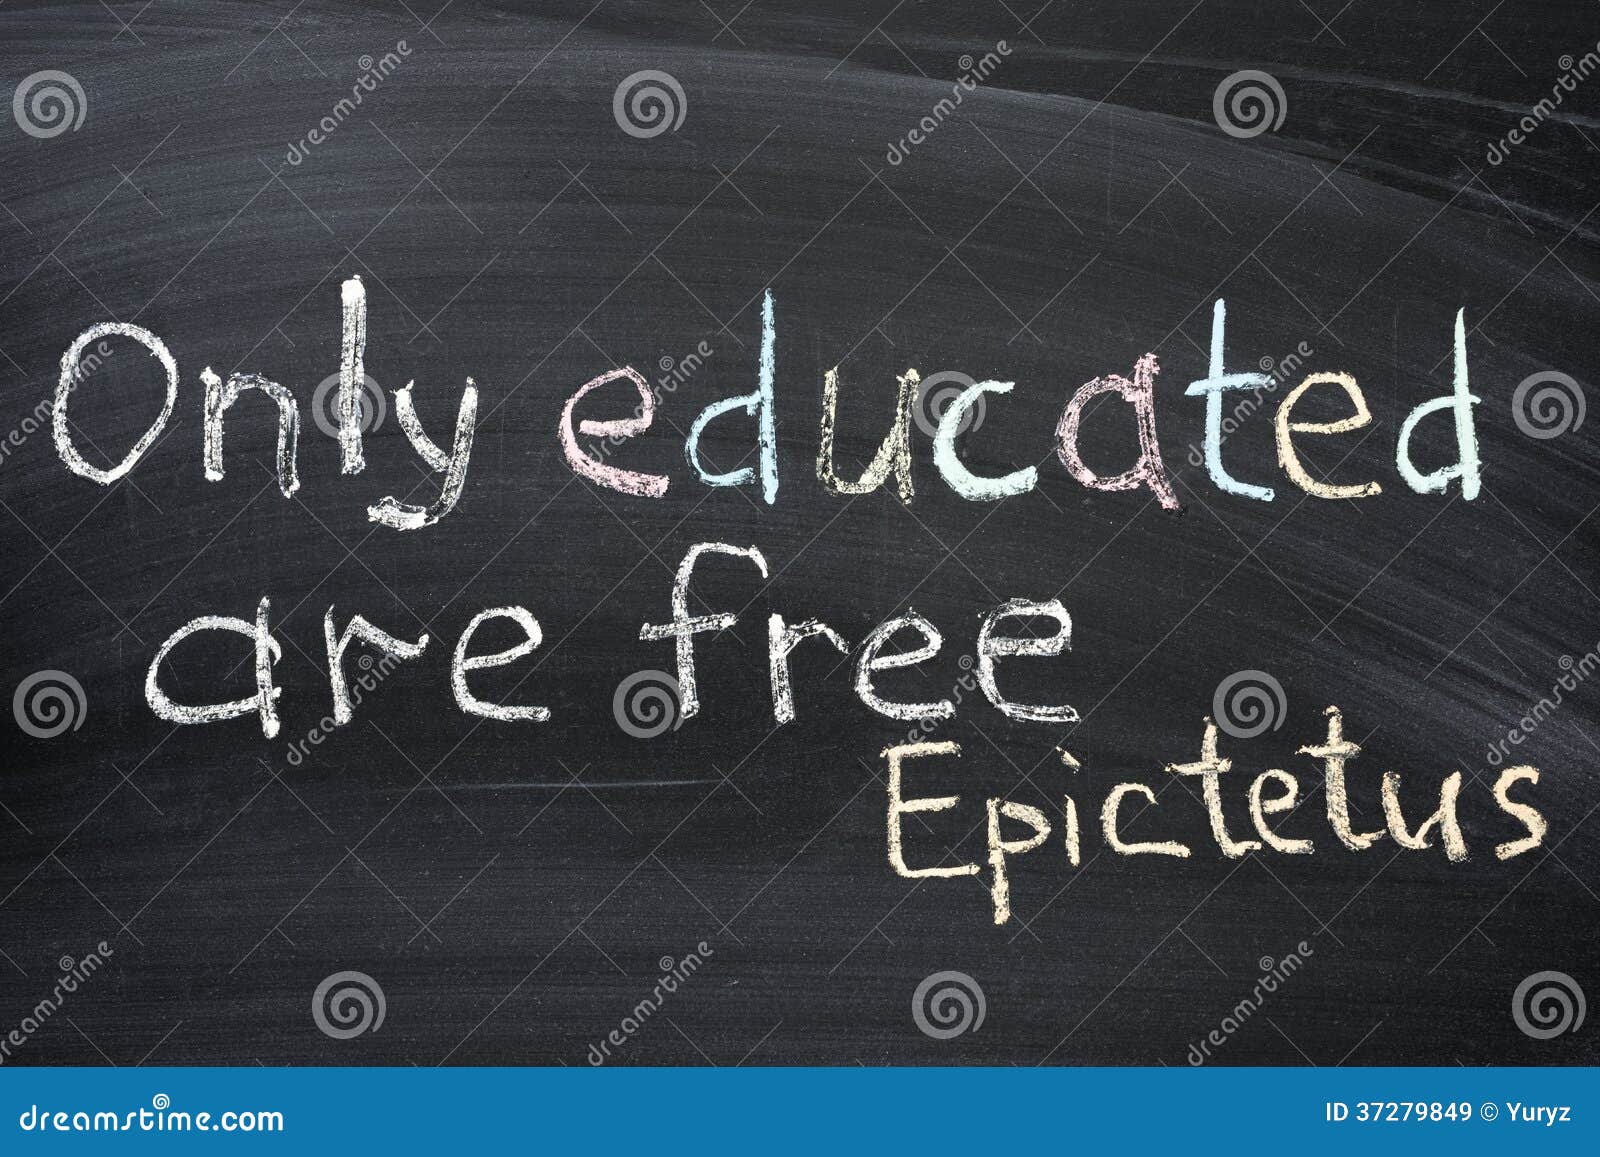 educated are free